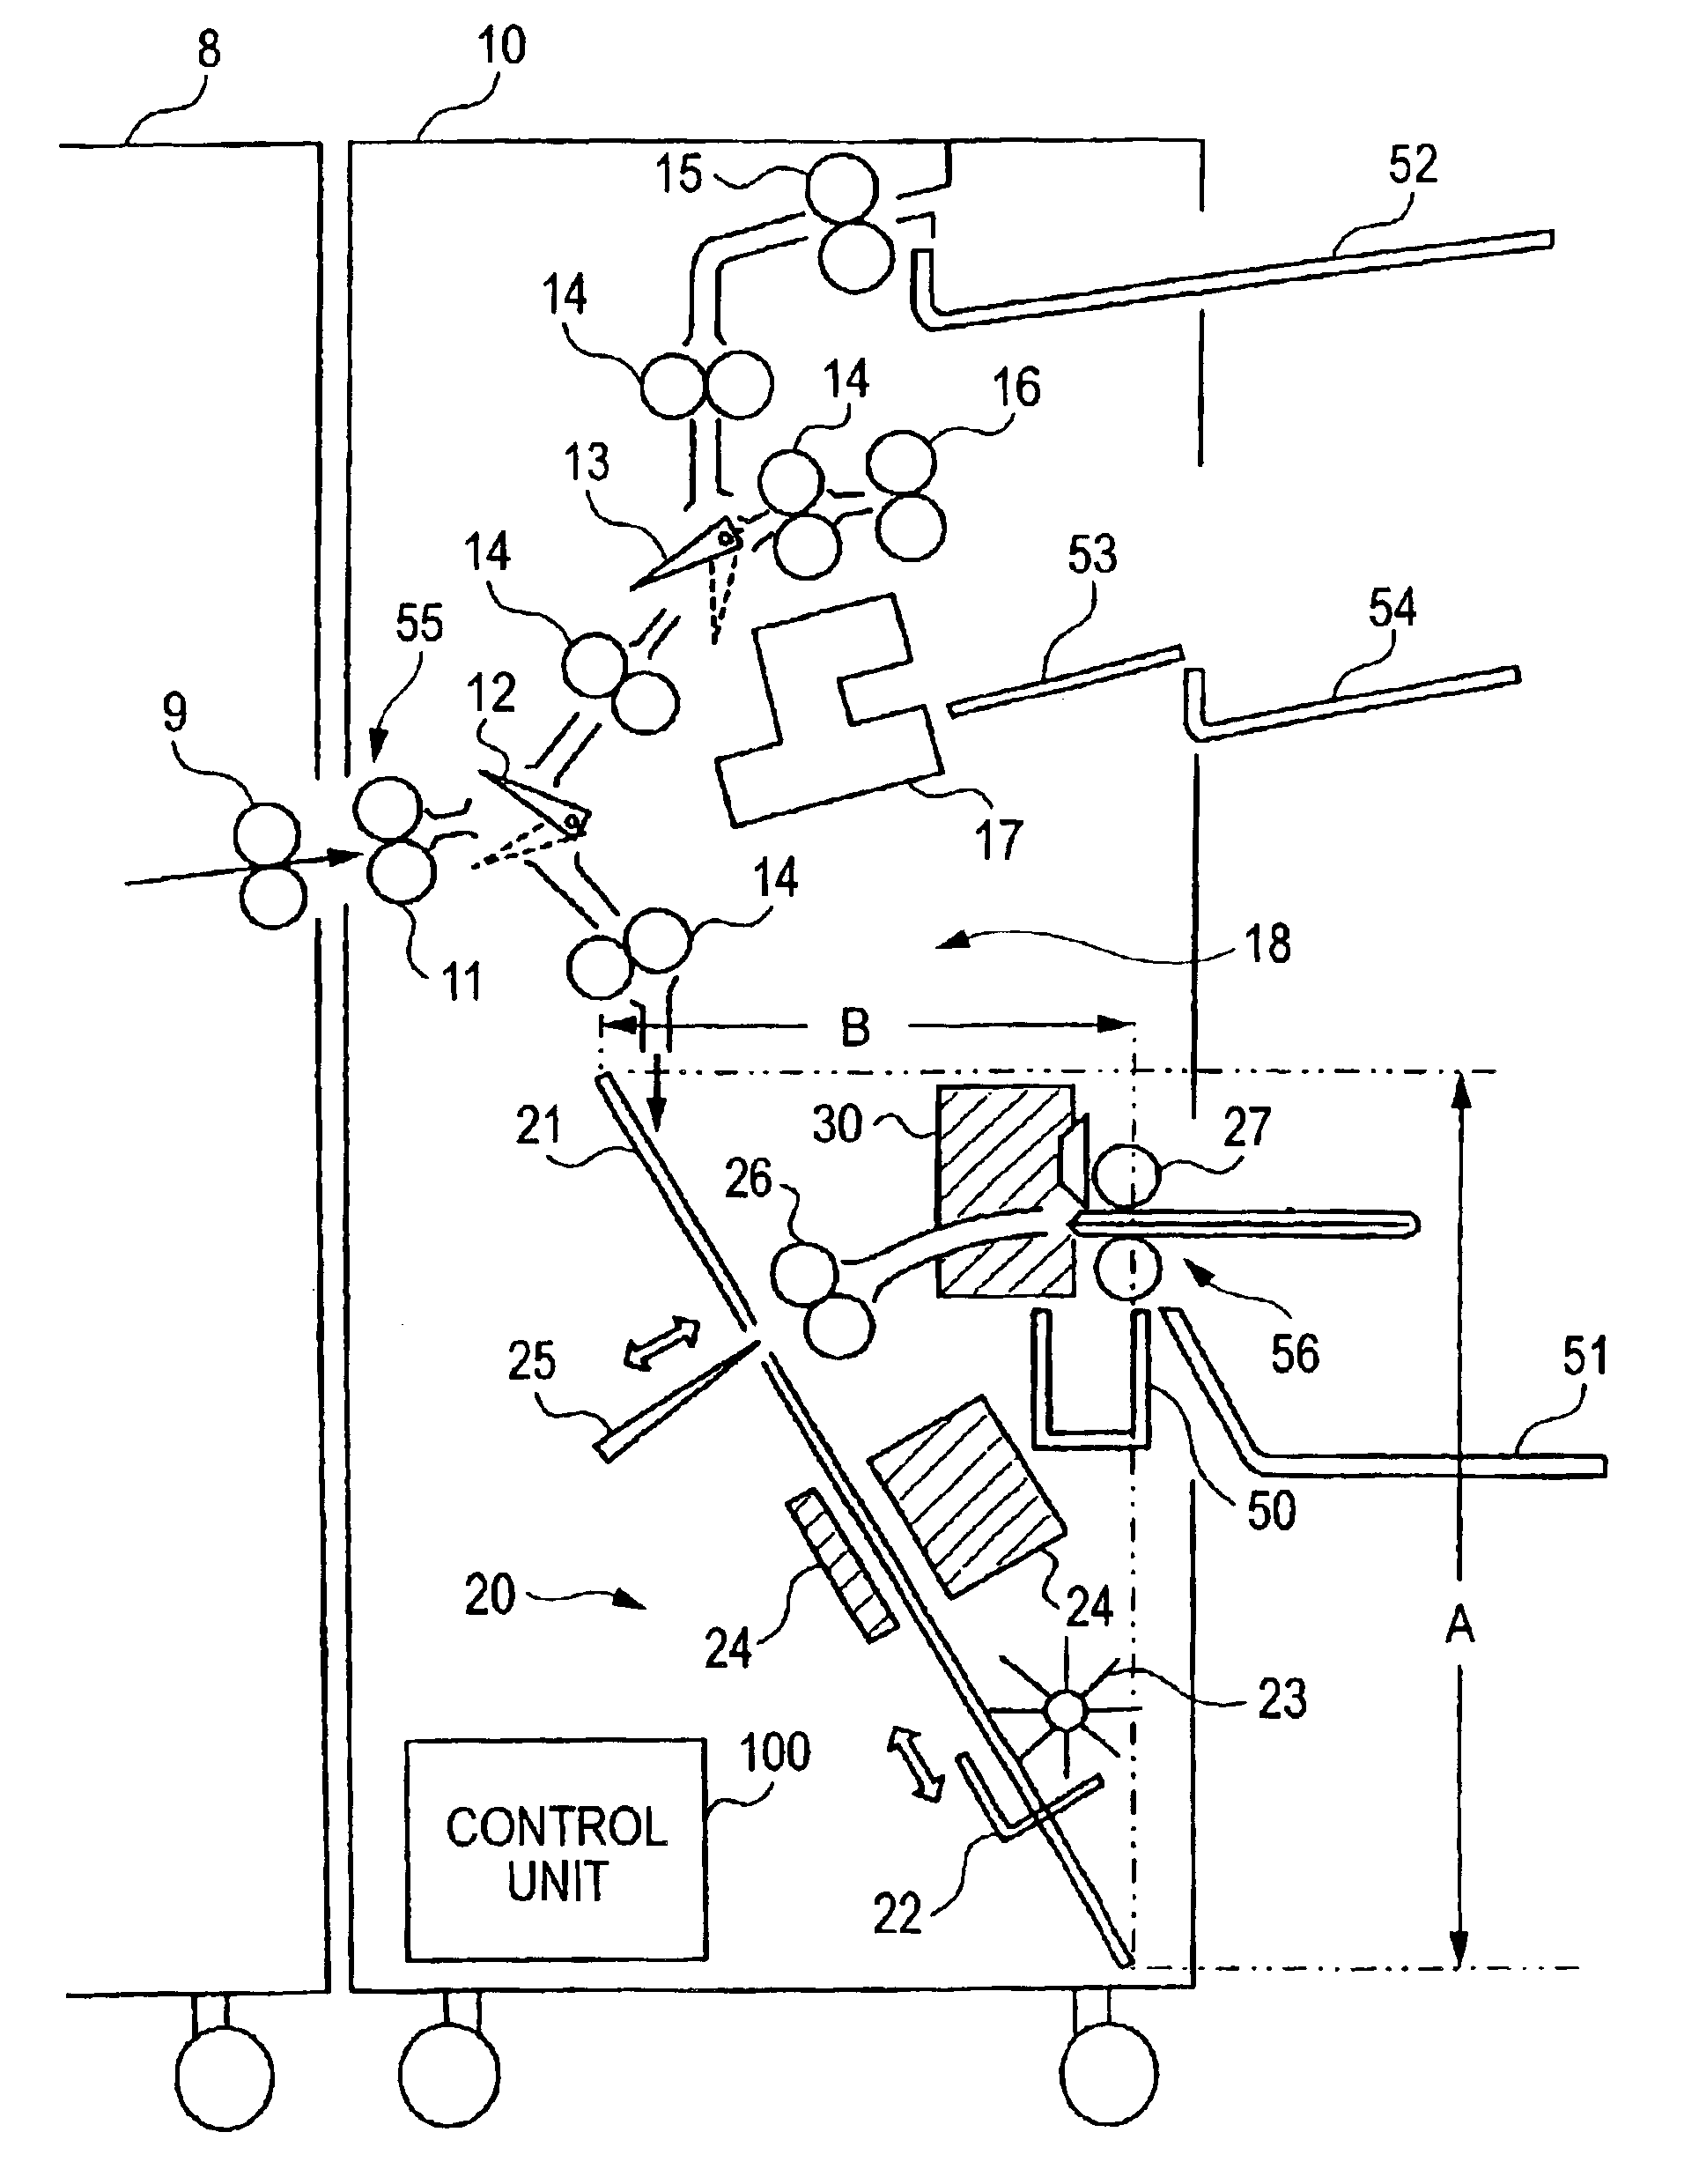 Paper processing apparatus and cutter unit